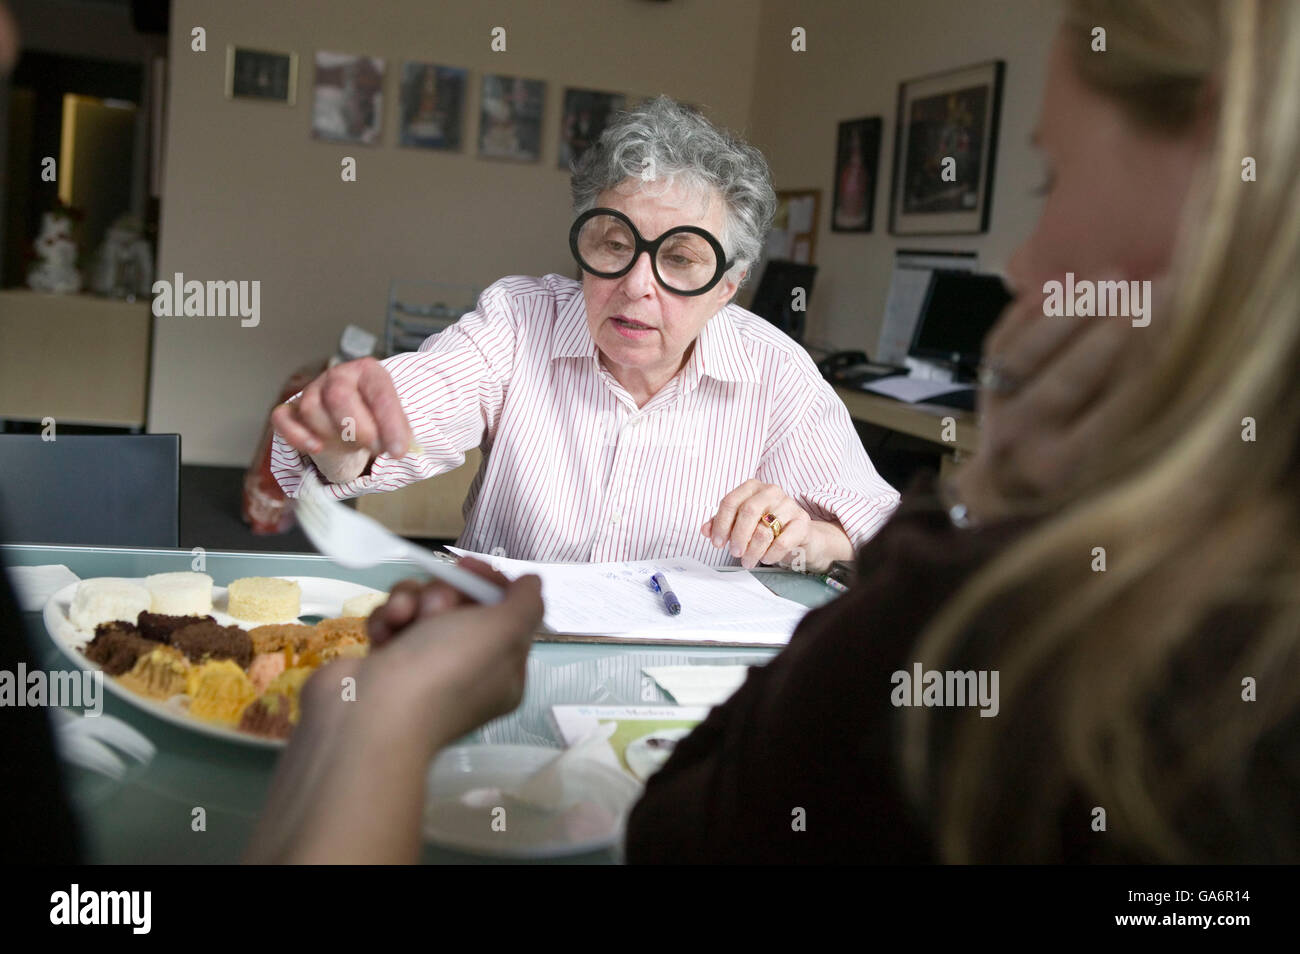 6 April 2006 - New York City - Sylvia Weinstock conducts a consultation with clients. Stock Photo